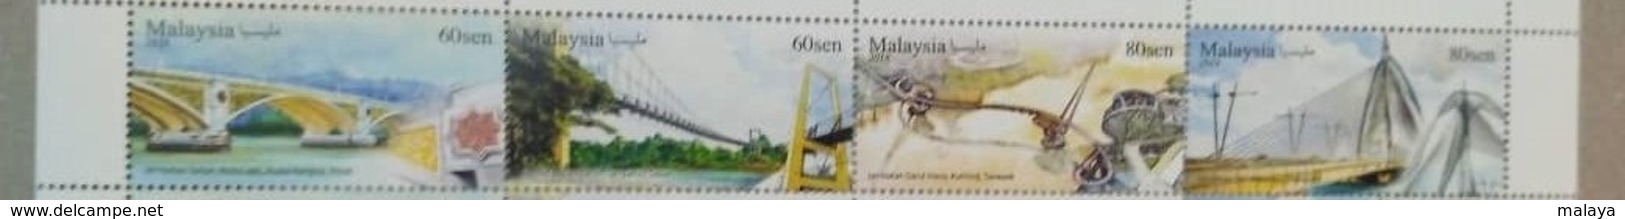 Malaysia 2018 Unique Structure Bridge Tourism Architecture  Setenant Strip Plate From Sheet Of 3 MNH Unissued - Malaysia (1964-...)